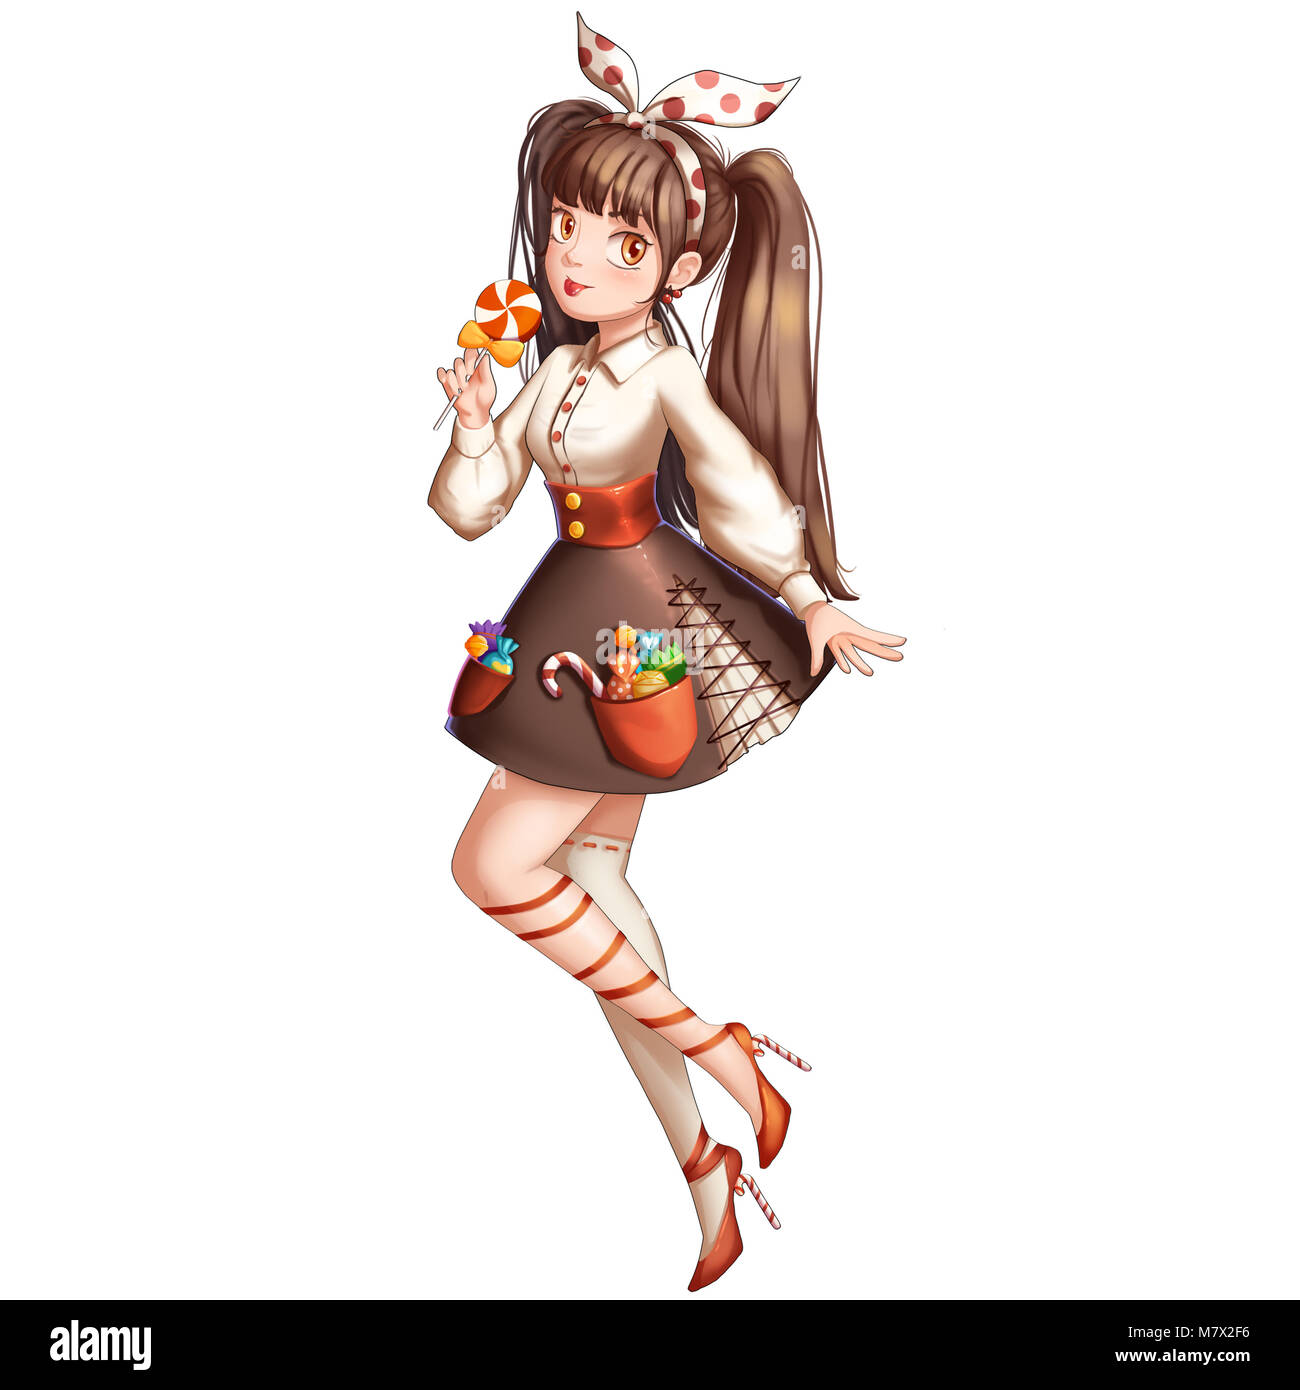 Candy Girl with Anime and Cartoon Style. Video Game's Digital CG Artwork,  Concept Illustration, Realistic Cartoon Style Character Design Stock Photo  - Alamy